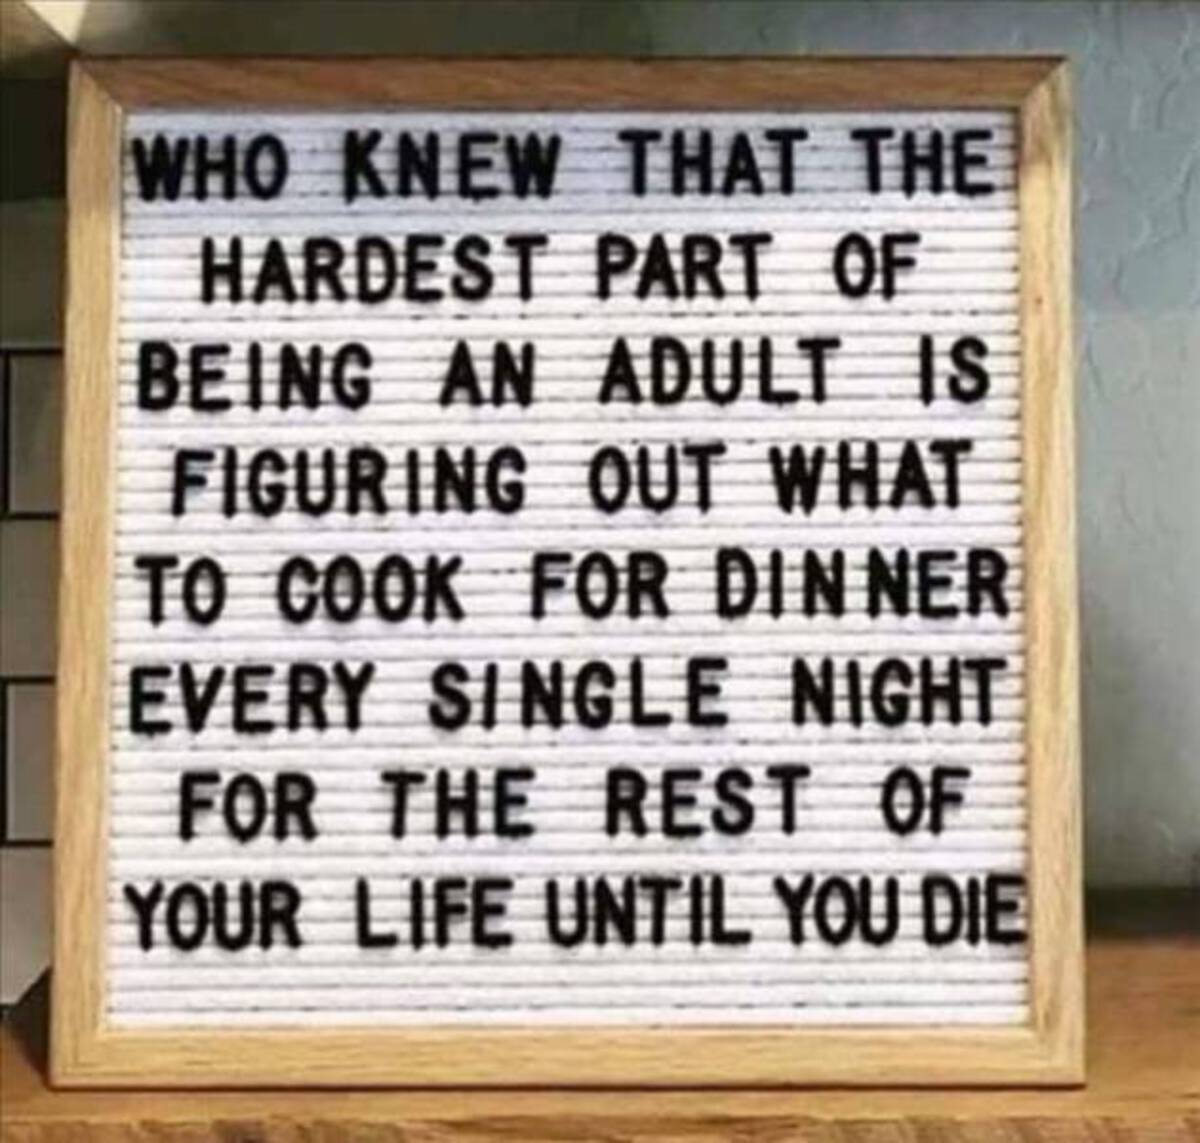 adult is figuring out what to cook - Who Knew That The Hardest Part Of Being An Adult Is Figuring Out What To Cook For Dinner Every Single Night For The Rest Of Your Life Until You Die